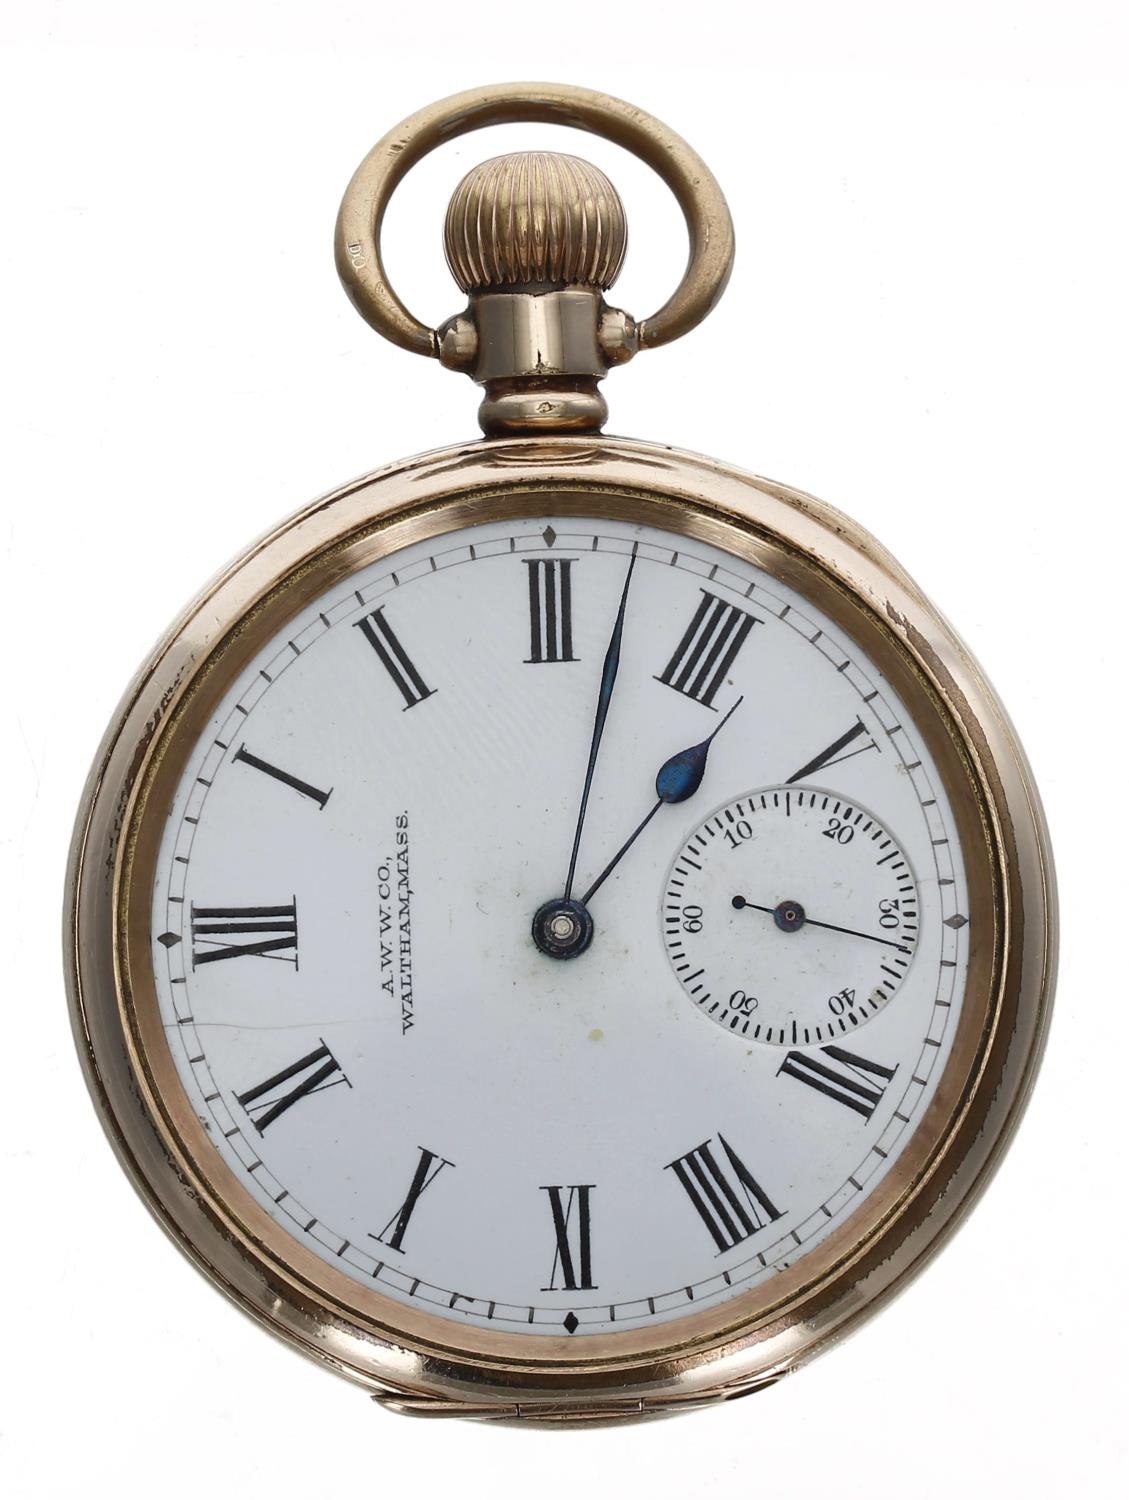 American Waltham 'Riverside Maximus' gold plated lever pocket watch, circa 1902, serial no. - Image 2 of 4